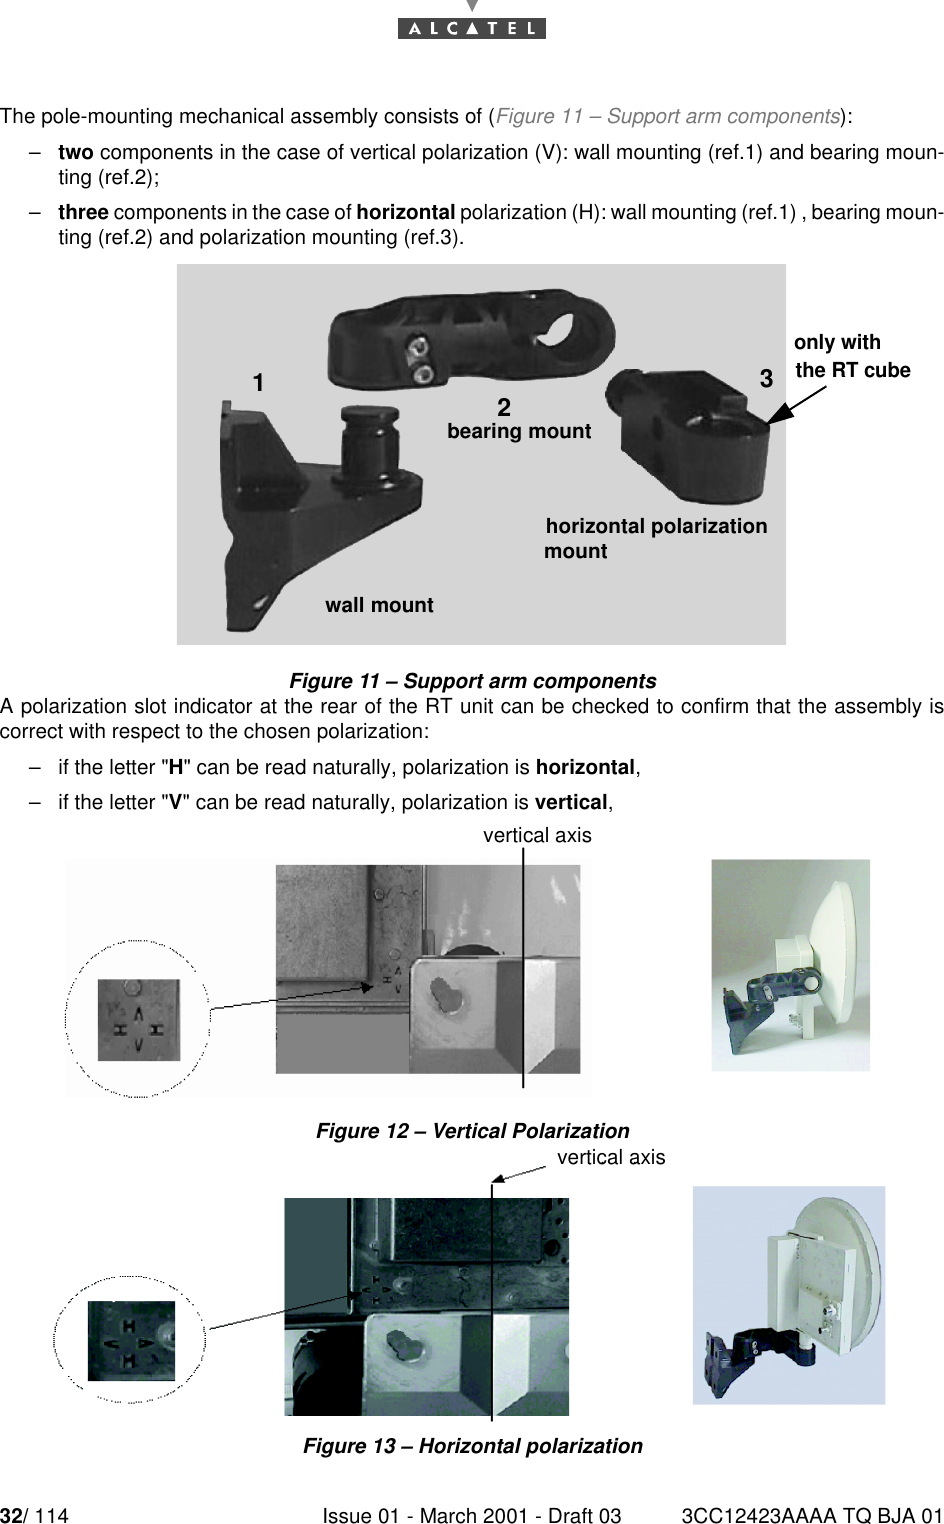 32/ 114 Issue 01 - March 2001 - Draft 03 3CC12423AAAA TQ BJA 0152The pole-mounting mechanical assembly consists of (Figure 11 – Support arm components):–two components in the case of vertical polarization (V): wall mounting (ref.1) and bearing moun-ting (ref.2);–three components in the case of horizontal polarization (H): wall mounting (ref.1) , bearing moun-ting (ref.2) and polarization mounting (ref.3).Figure 11 – Support arm componentsA polarization slot indicator at the rear of the RT unit can be checked to confirm that the assembly iscorrect with respect to the chosen polarization:–if the letter &quot;H&quot; can be read naturally, polarization is horizontal,–if the letter &quot;V&quot; can be read naturally, polarization is vertical,Figure 12 – Vertical PolarizationFigure 13 – Horizontal polarization123bearing mountwall mounthorizontal polarizationmountonly with the RT cubevertical axisvertical axisvertical axis